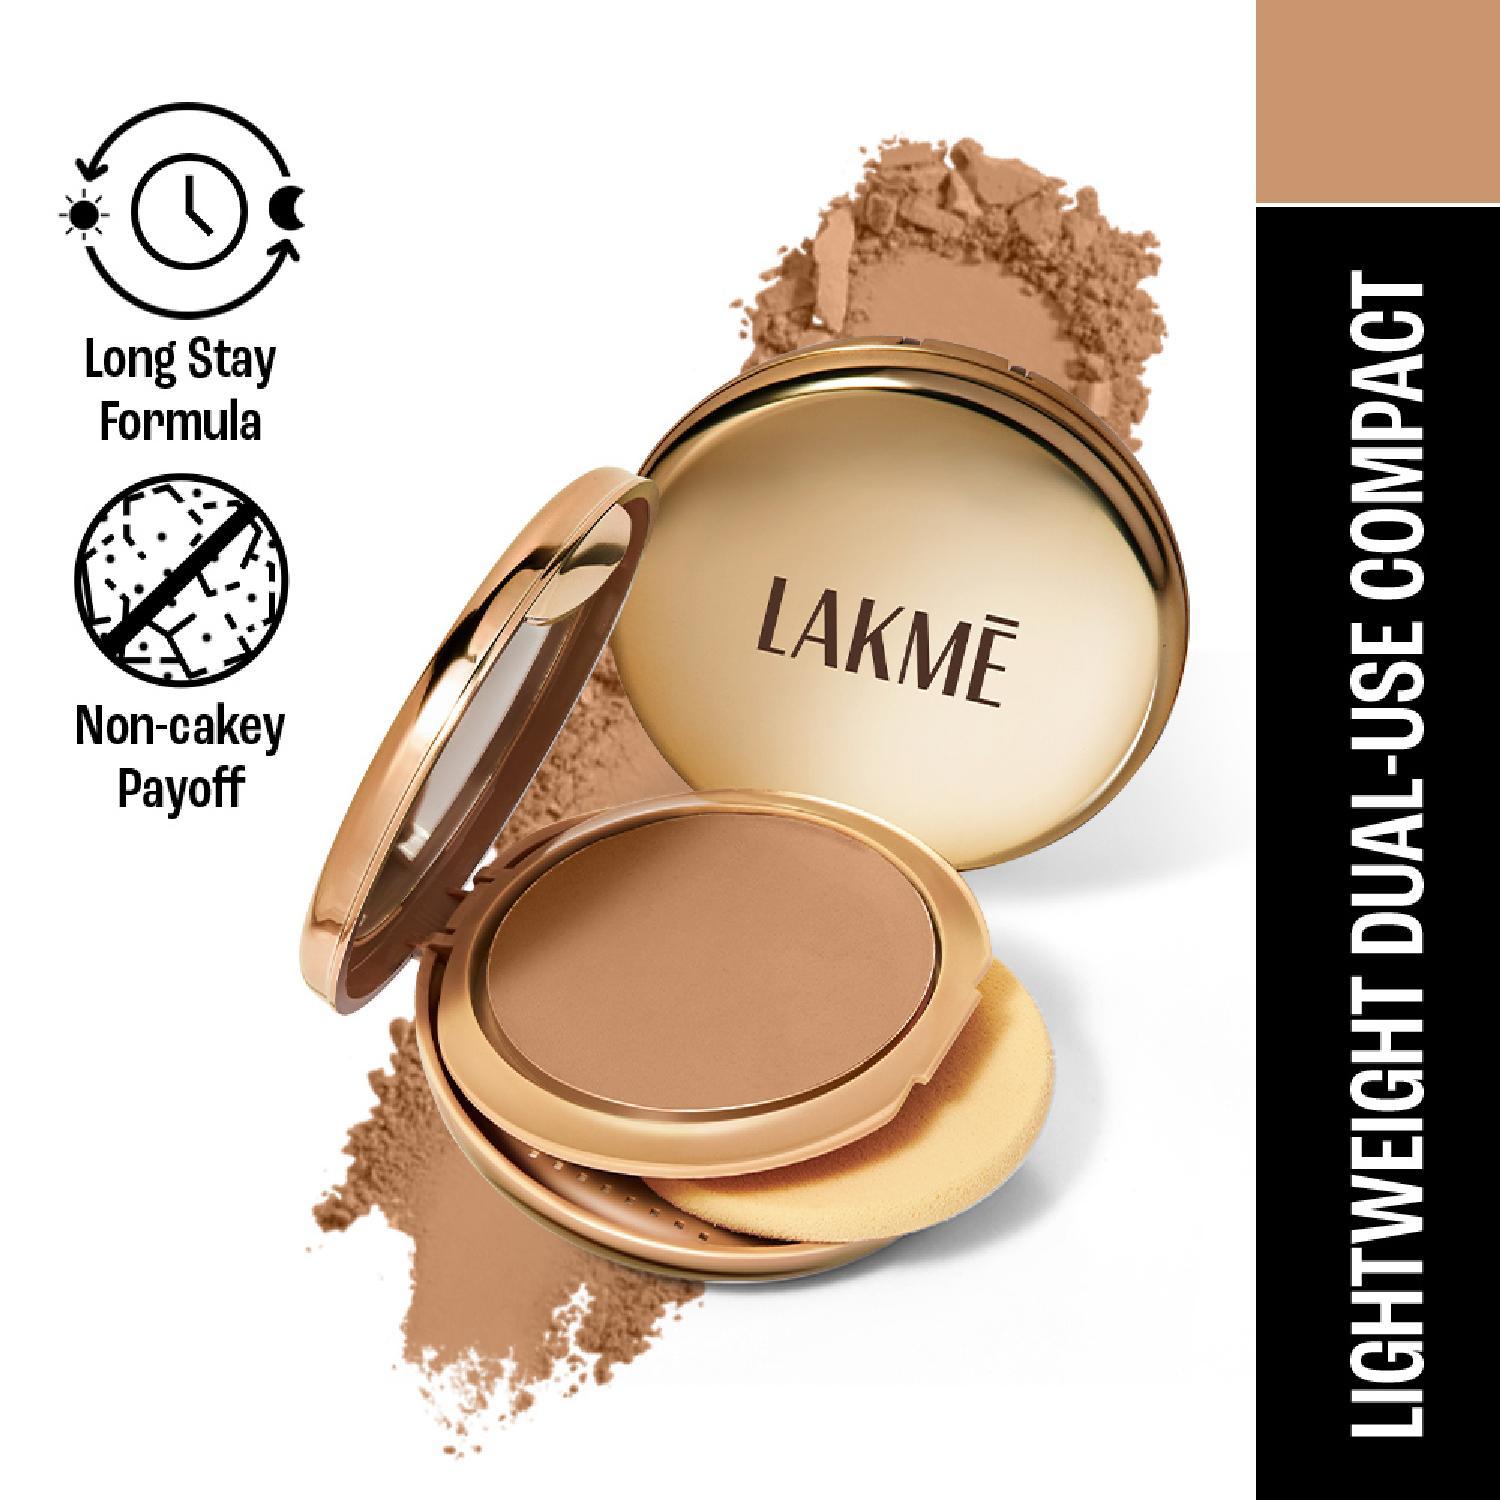 Lakme | Lakme 9 to 5 Unreal Dual Cover Pressed Powder, 2 In 1 Compact + Foundation, 38 Walnut (9g)